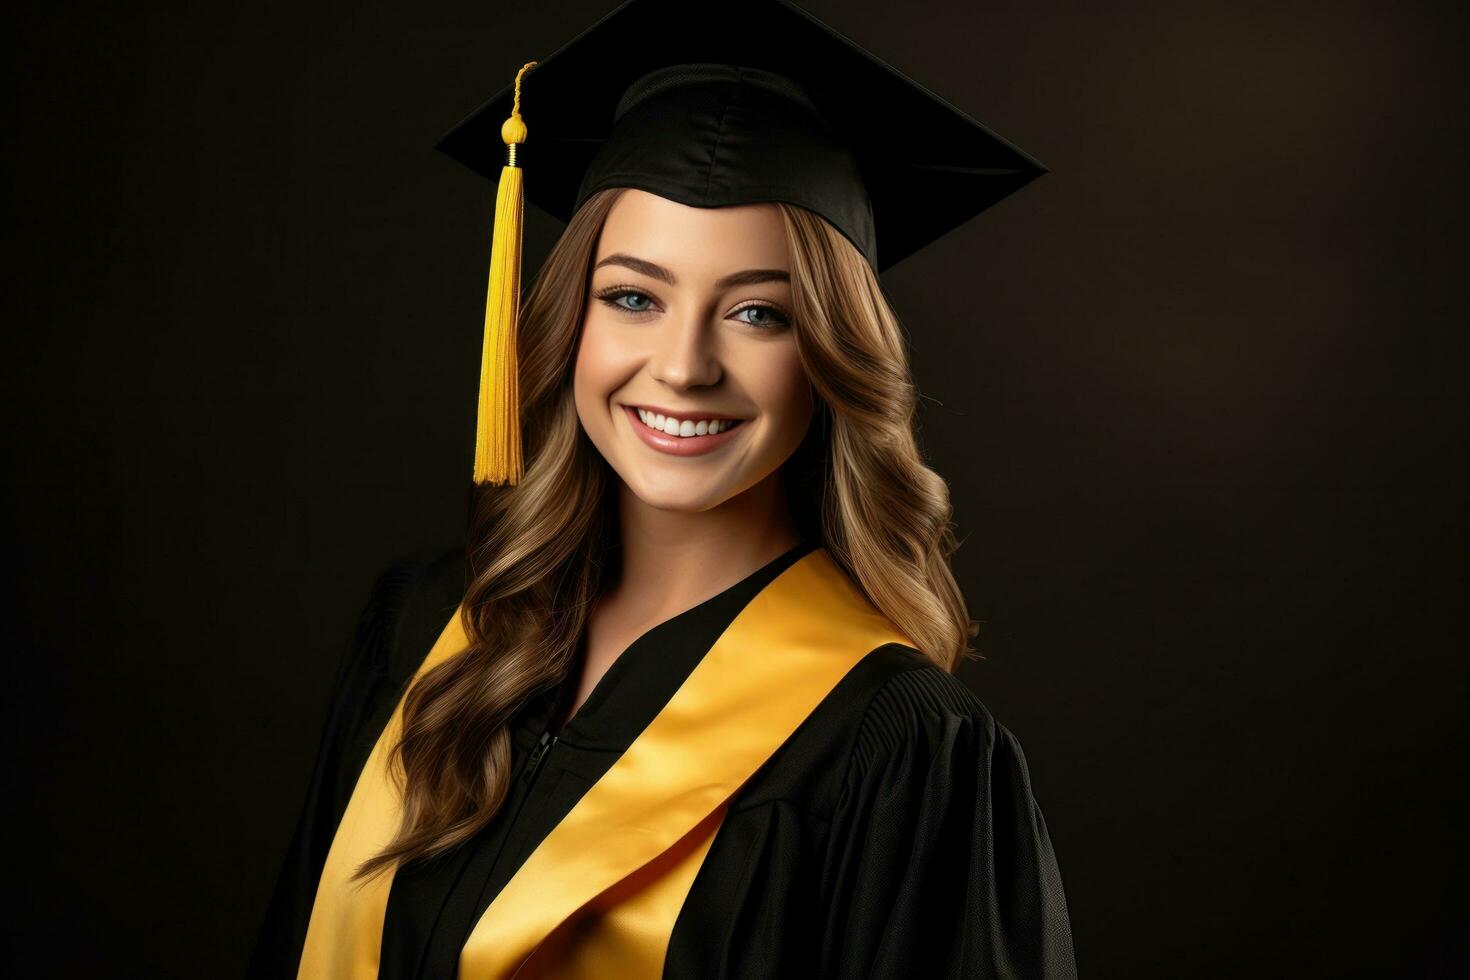 Smiling young woman in graduation gowns photo